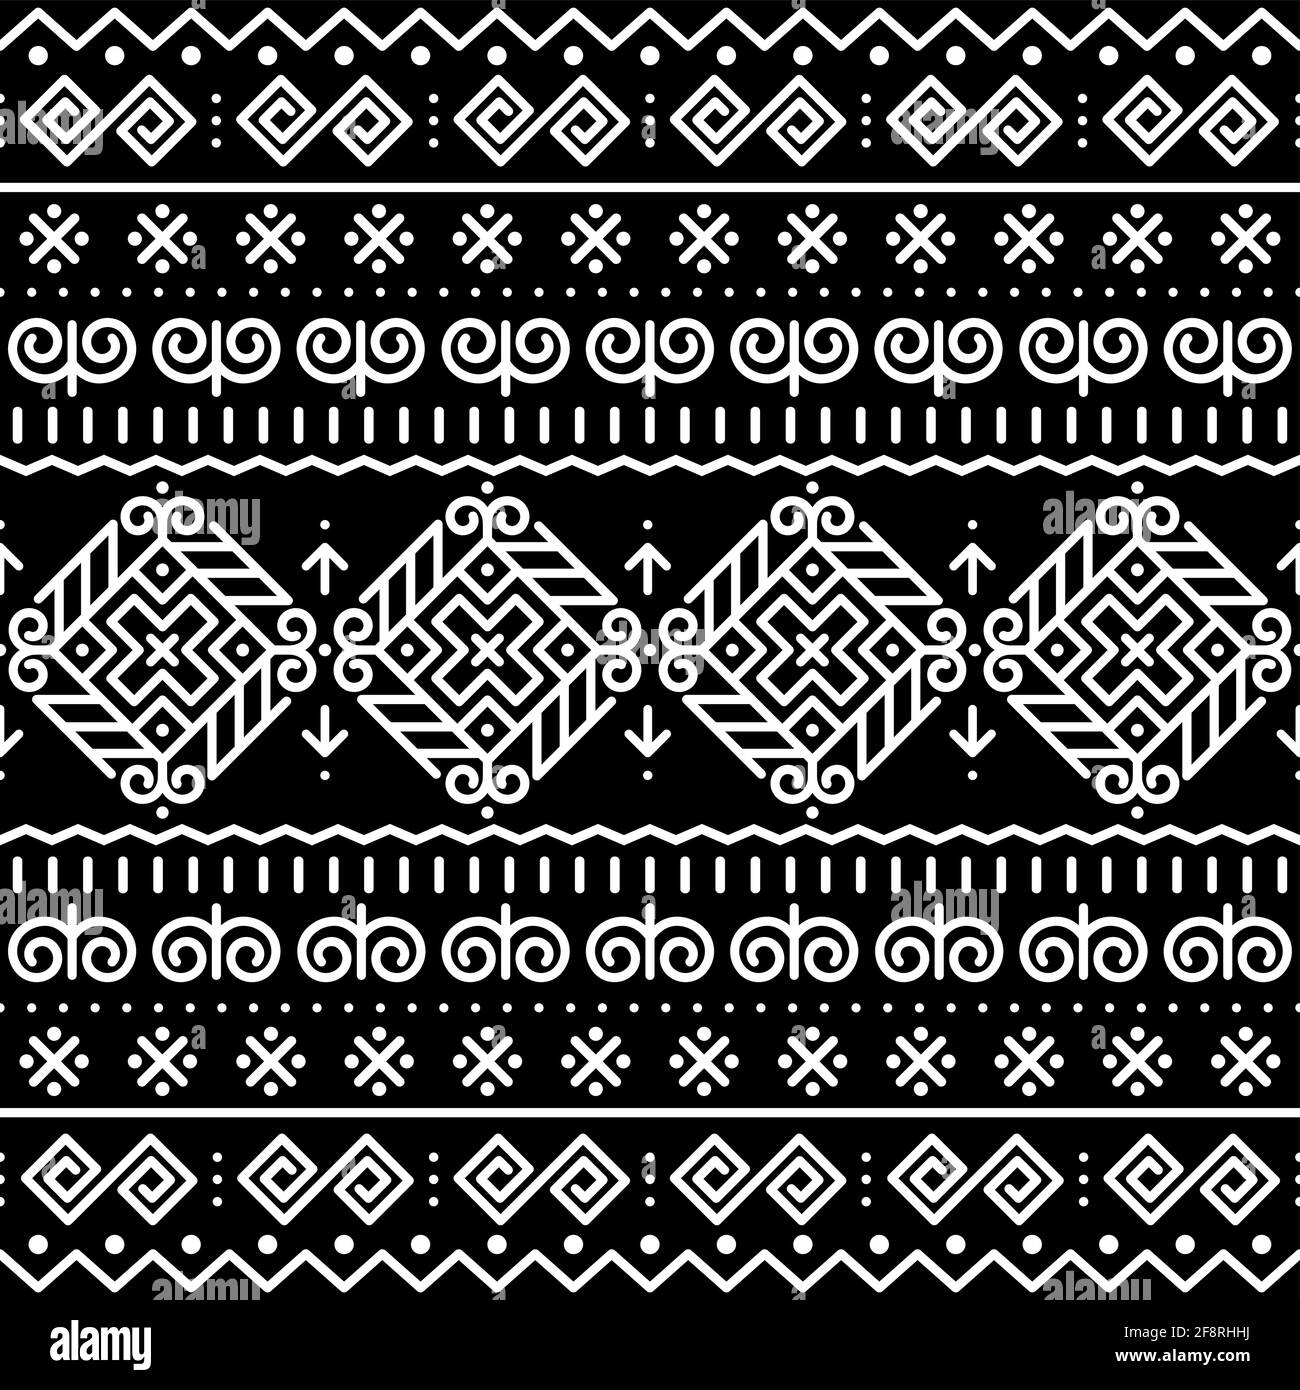 Slovak folk art vector seamless pattern with ethnic, tribal geometric shapes - inspired by traditional painted art from village Cicmany in Zilina regi Stock Vector